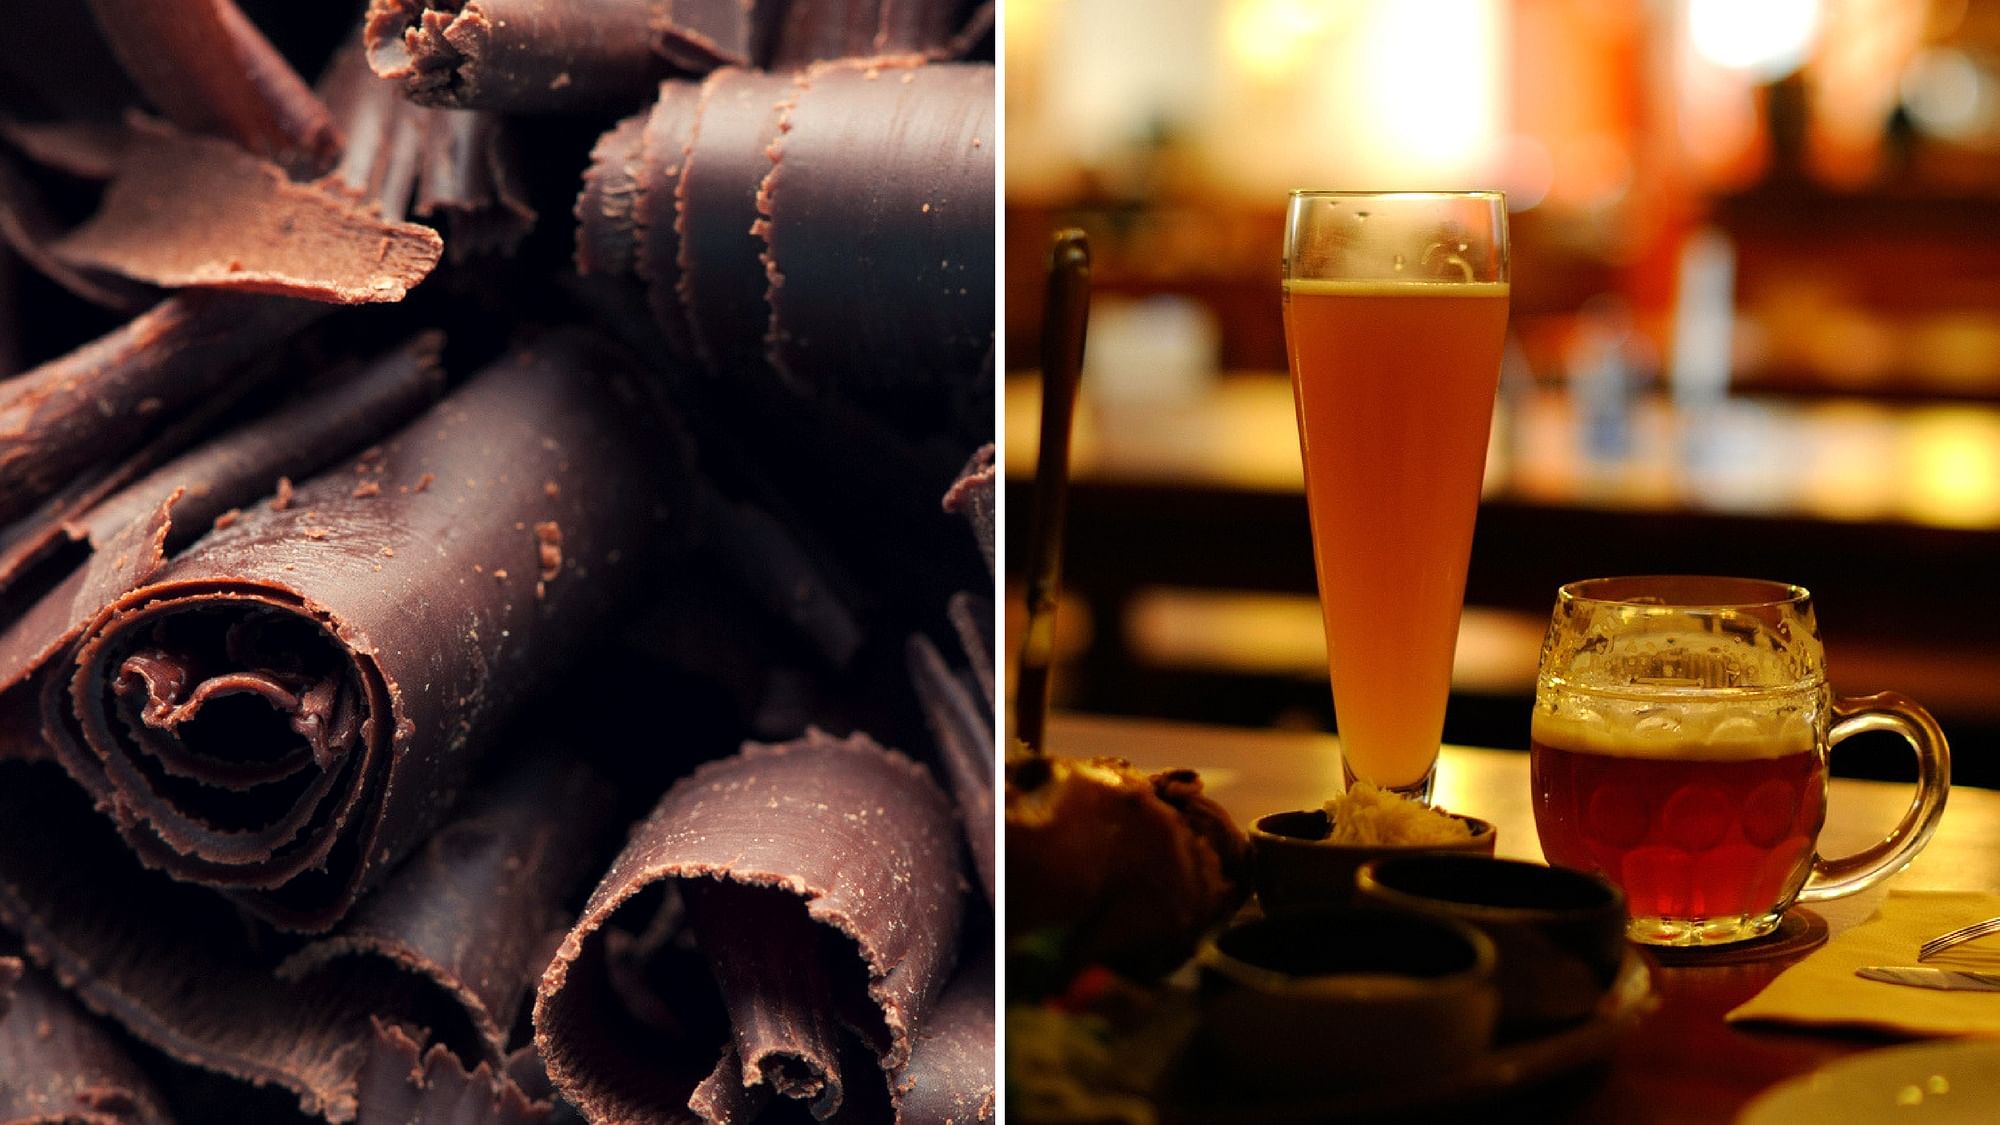 Instead of your helping of dark chocolate, try... smoked stout beer? (Photo: iStock; Image altered by <b>The Quint</b>)